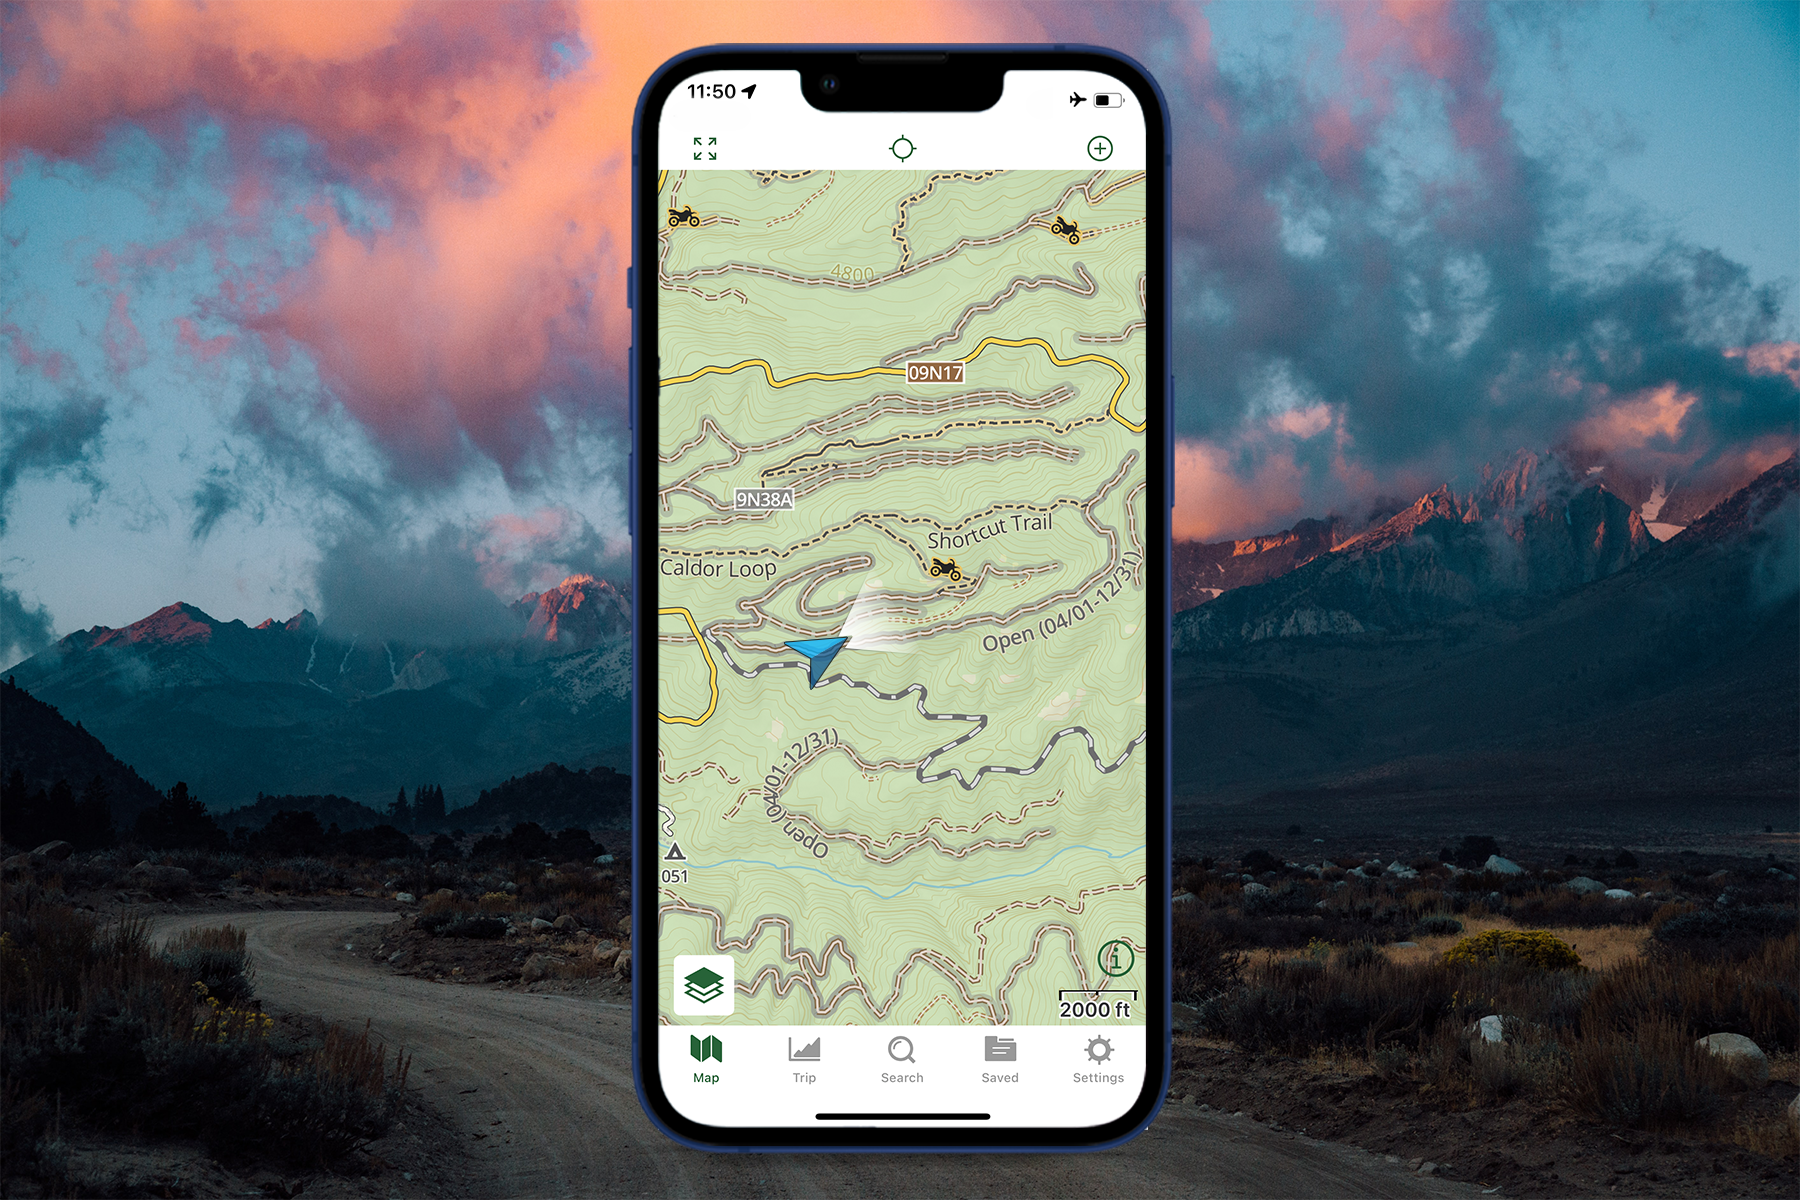 Gaia Overland map in the app.